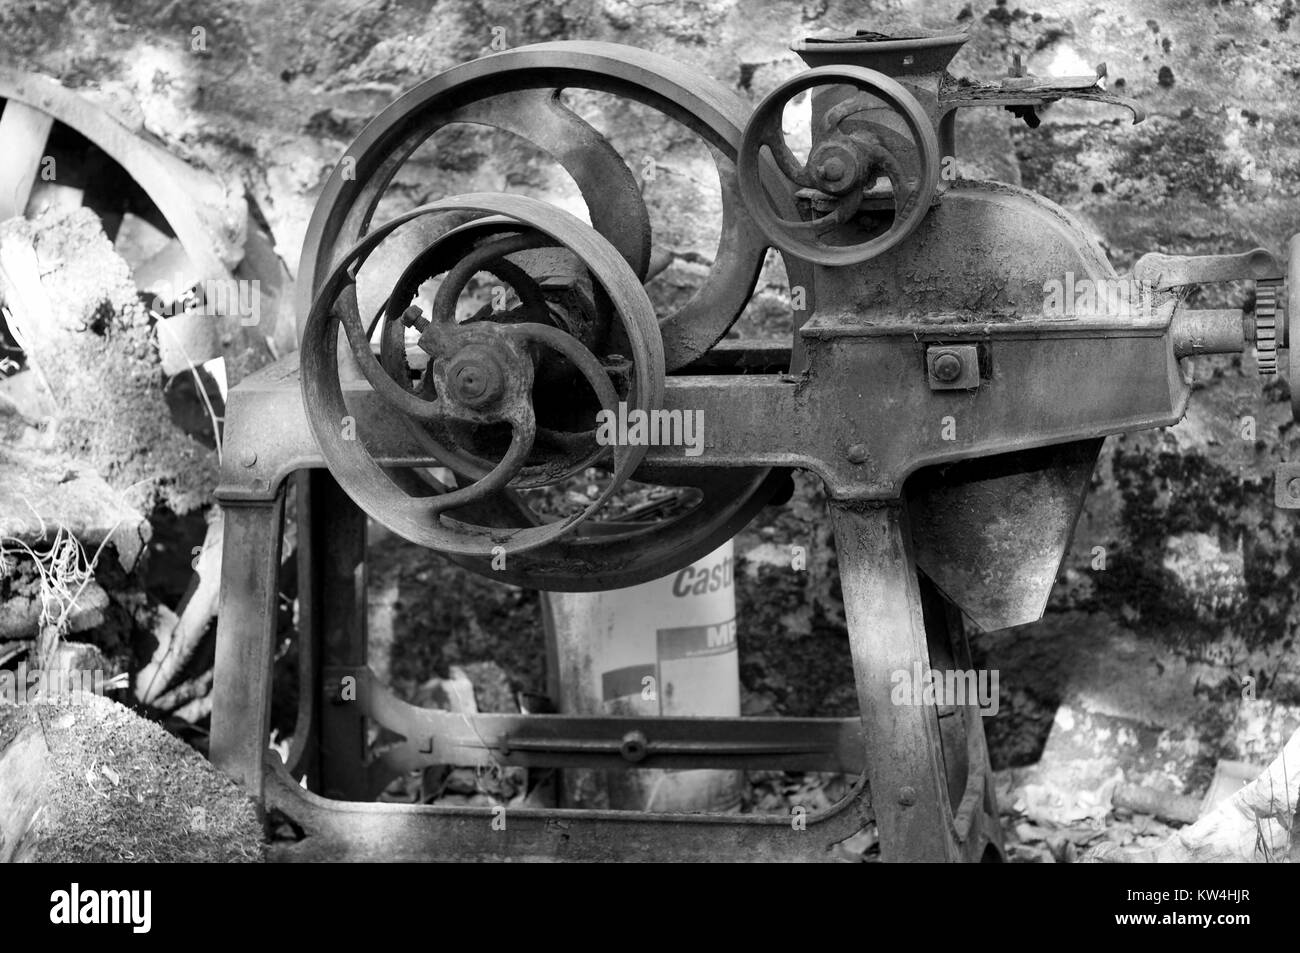 Antique piece of machinery in black & white Stock Photo